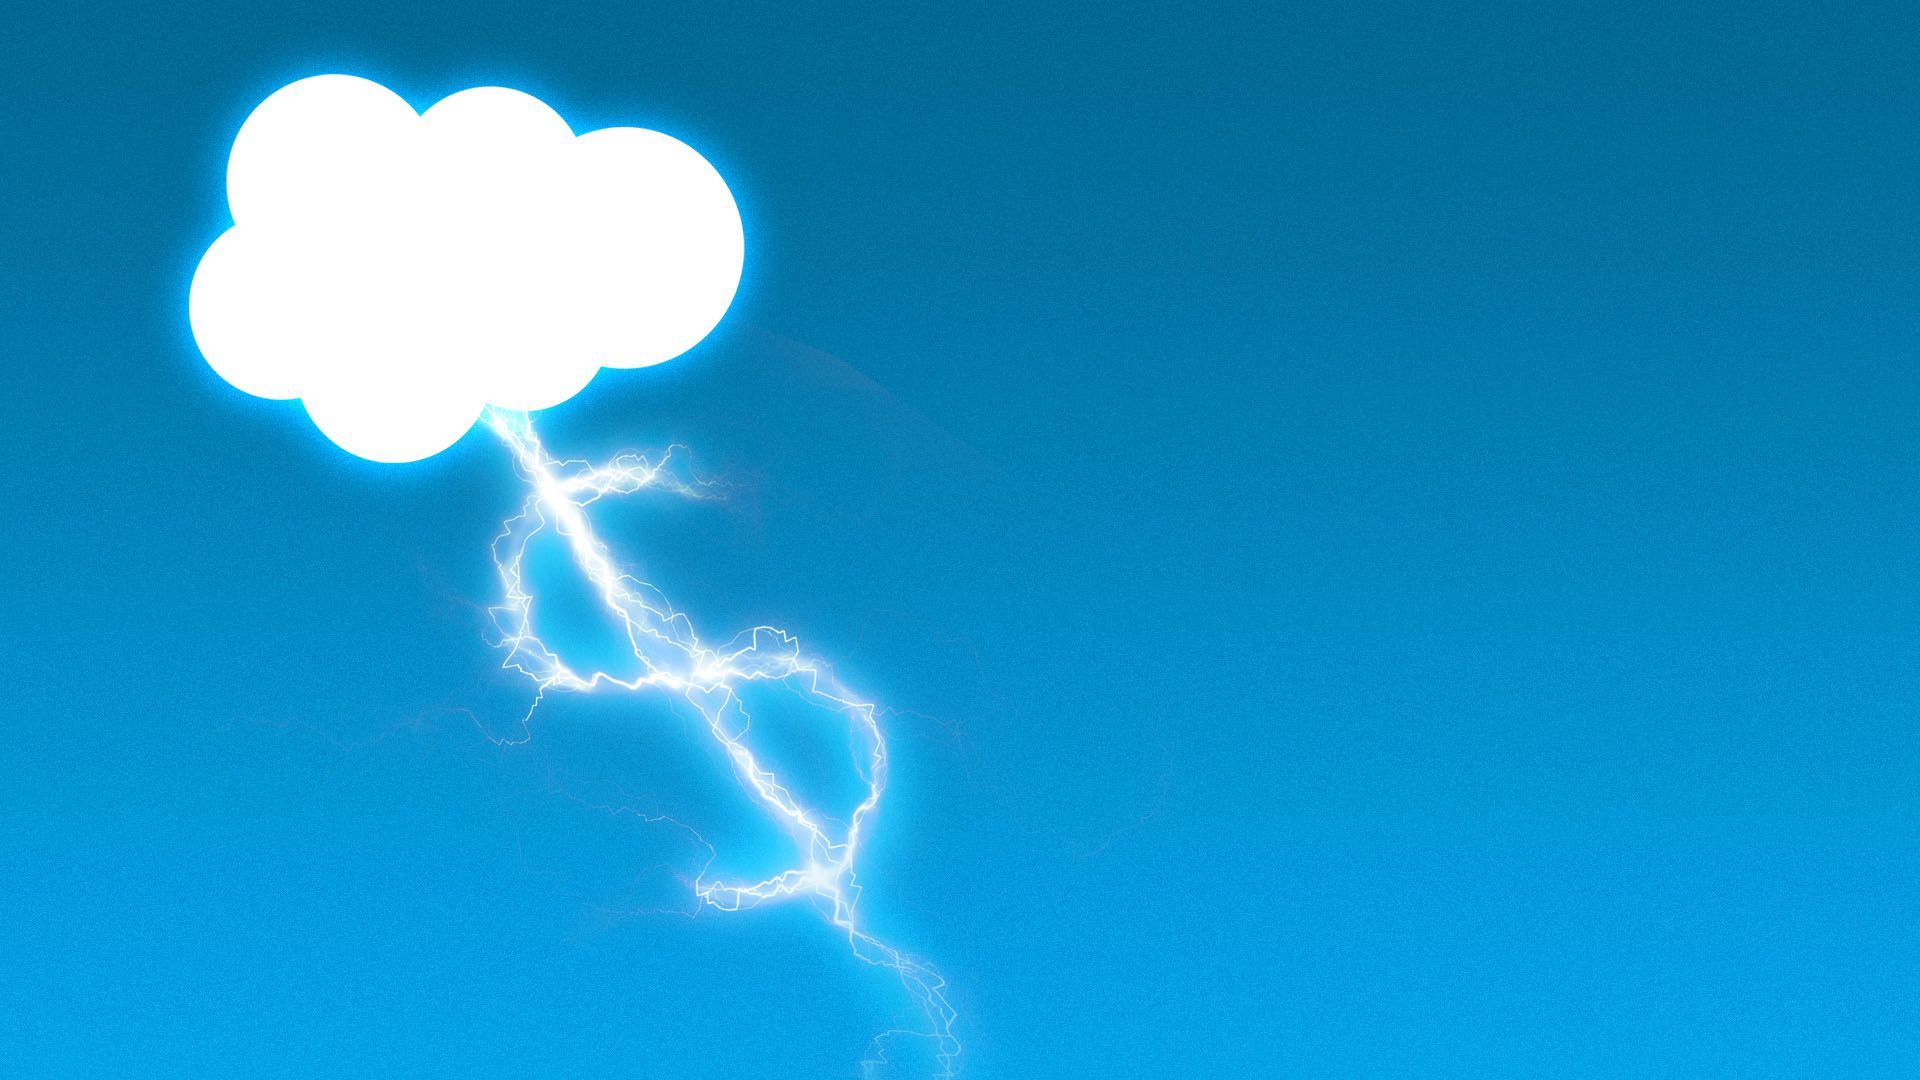 Illustration of the Salesforce cloud with a dollar sign lightning bolt coming from it